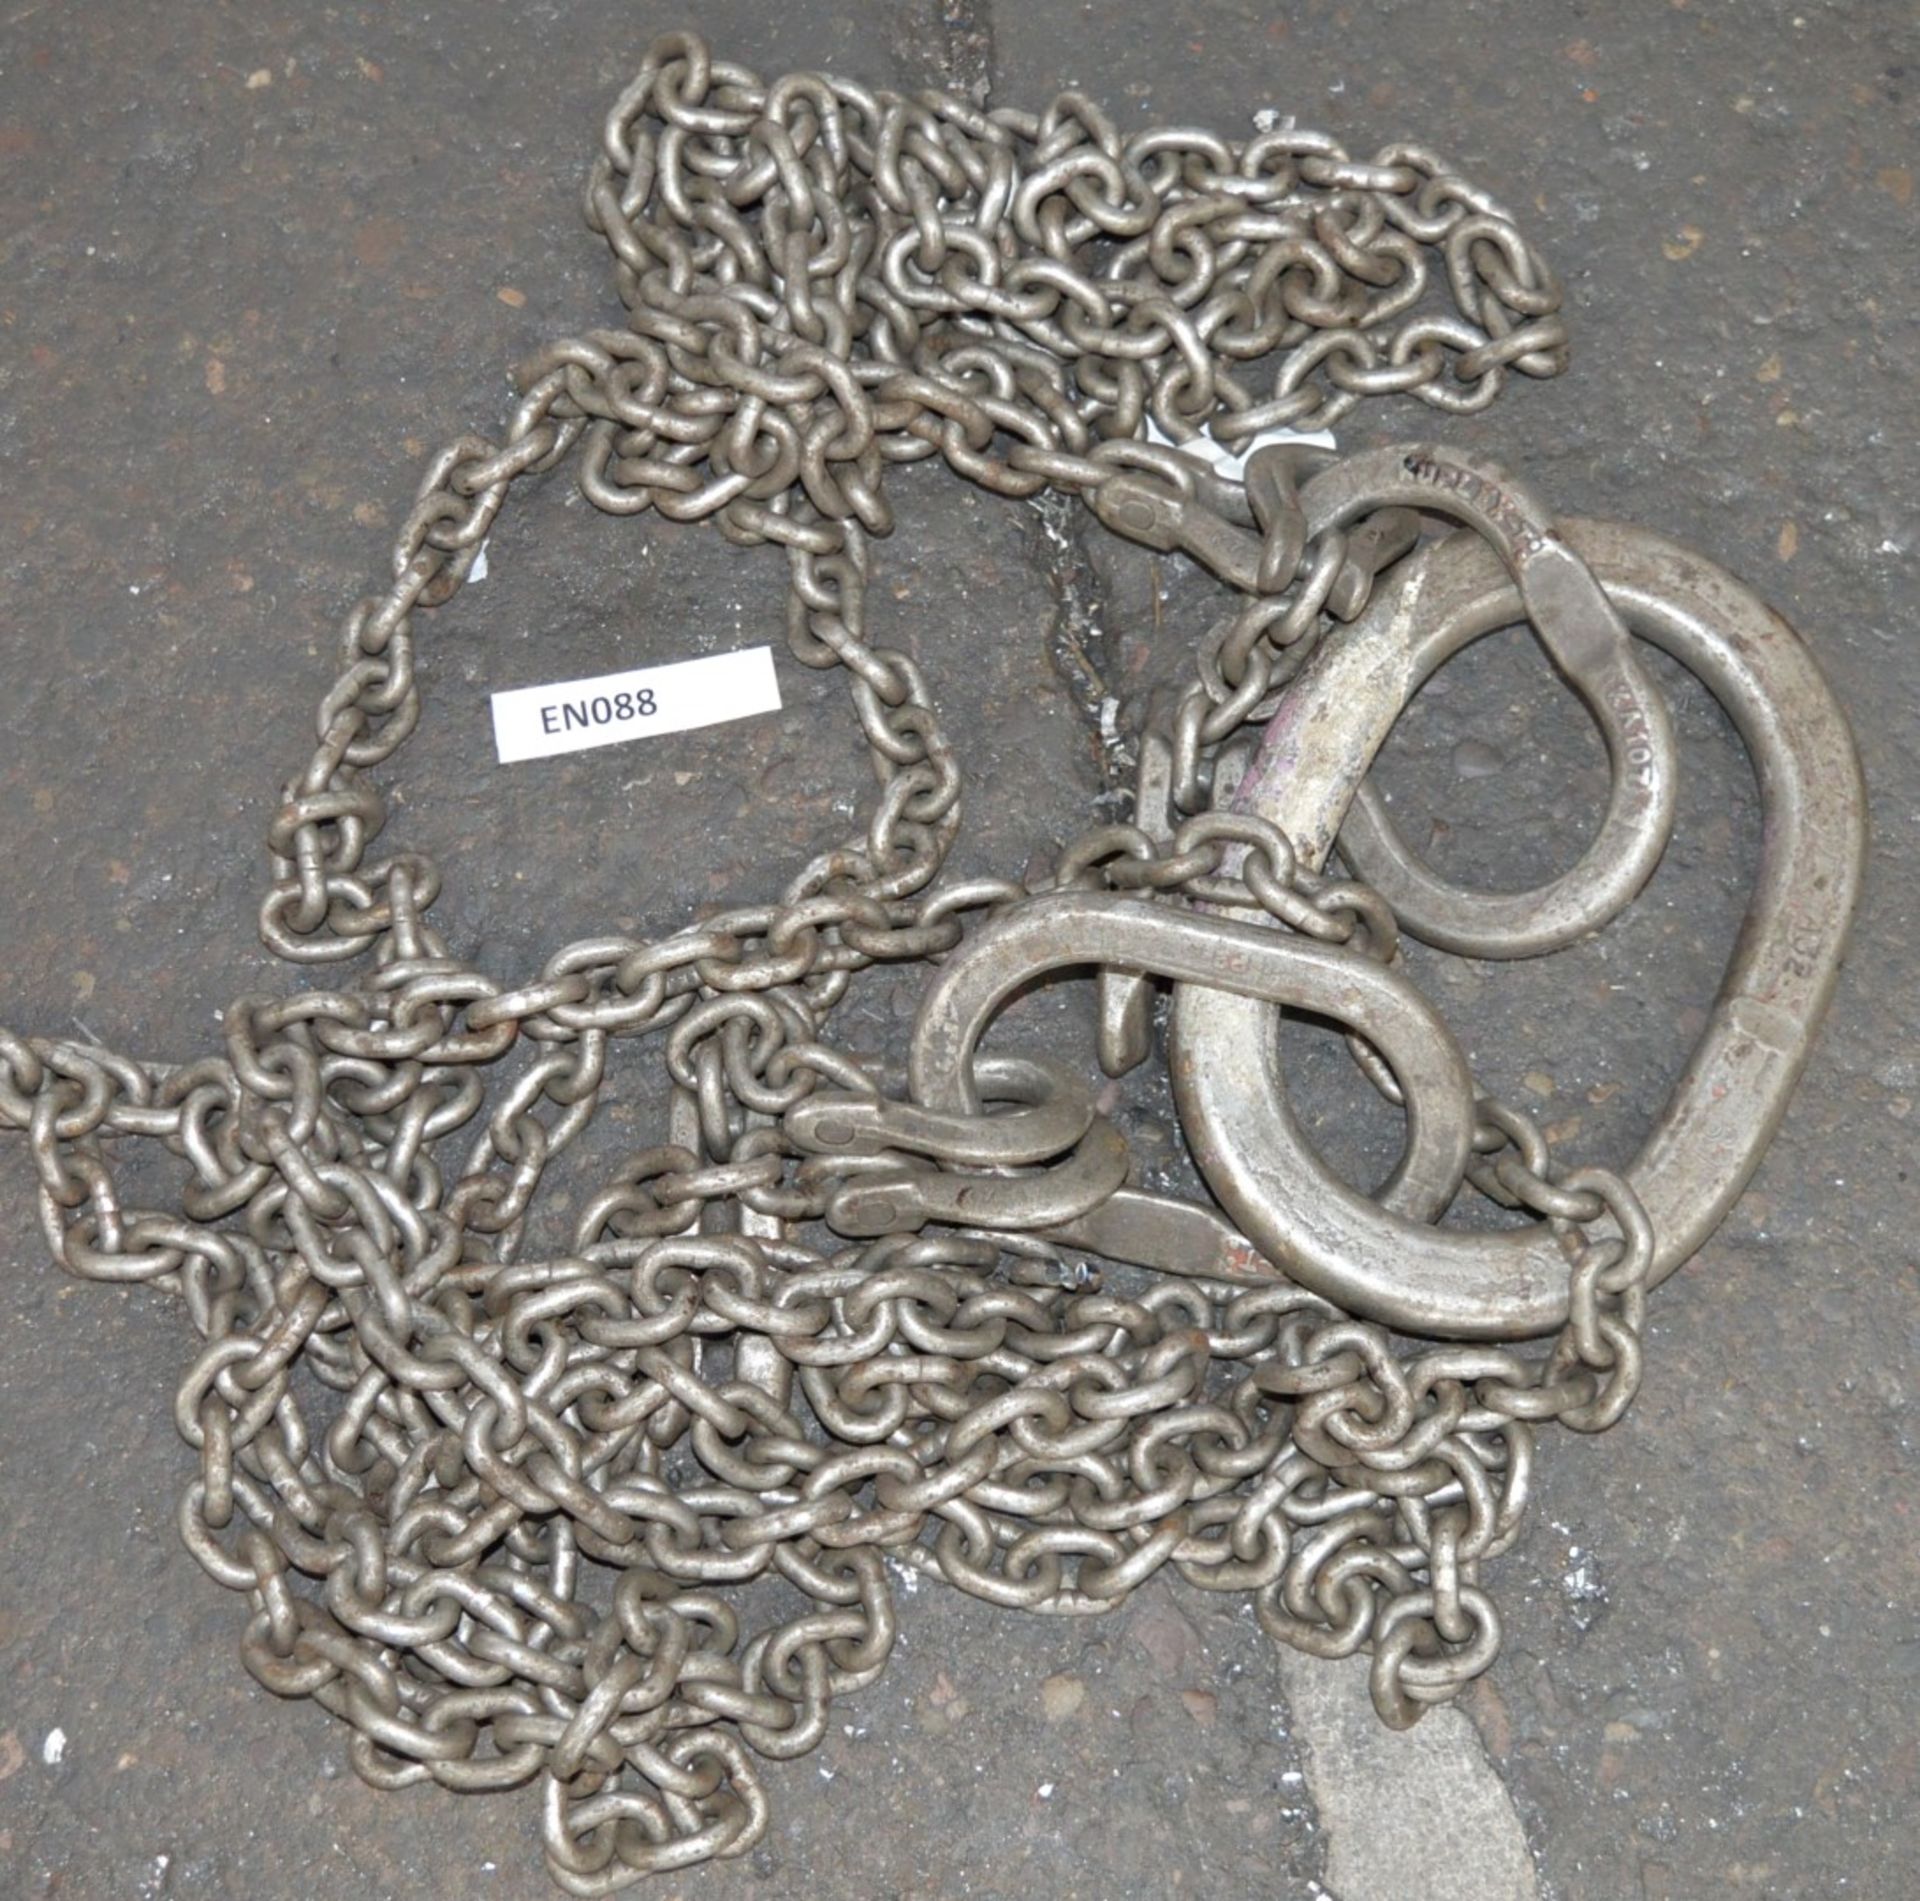 1 x Kuplex Lifting Chain - Heavy Duty Lifting Equipment - CL202 - Ref EN088 - Location: Worcester - Image 2 of 4